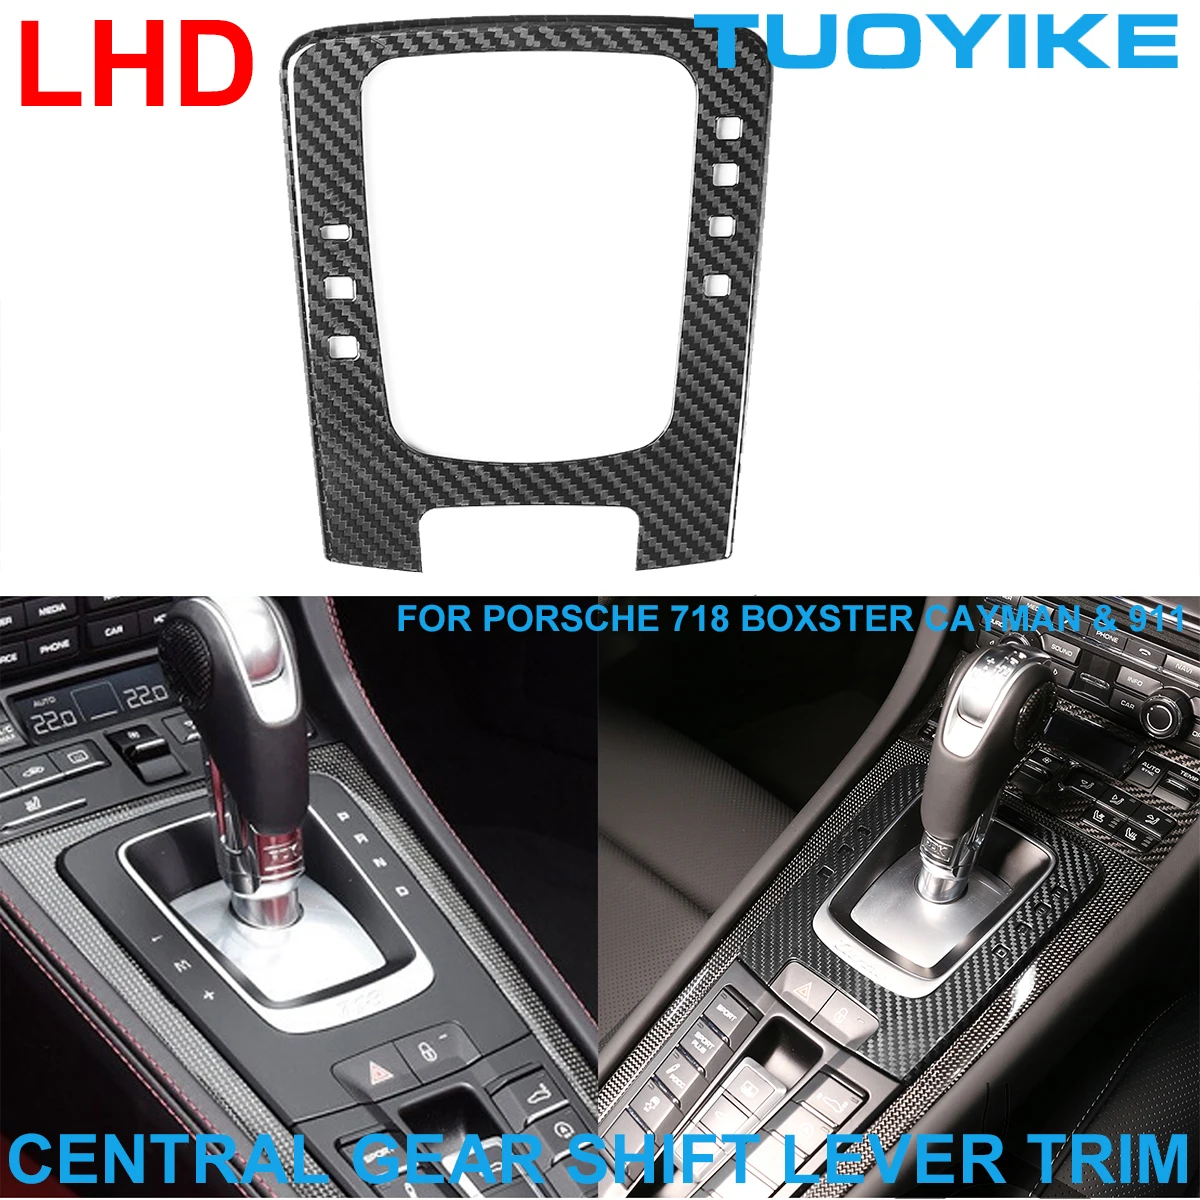 LHD Real Dry Carbon Fiber Central Gear Switch Lever Frame Panel Cover Trim Lipdukas skirtas Porsche 911 718 Cayman Boxster 2016-2019 Nuotrauka 0